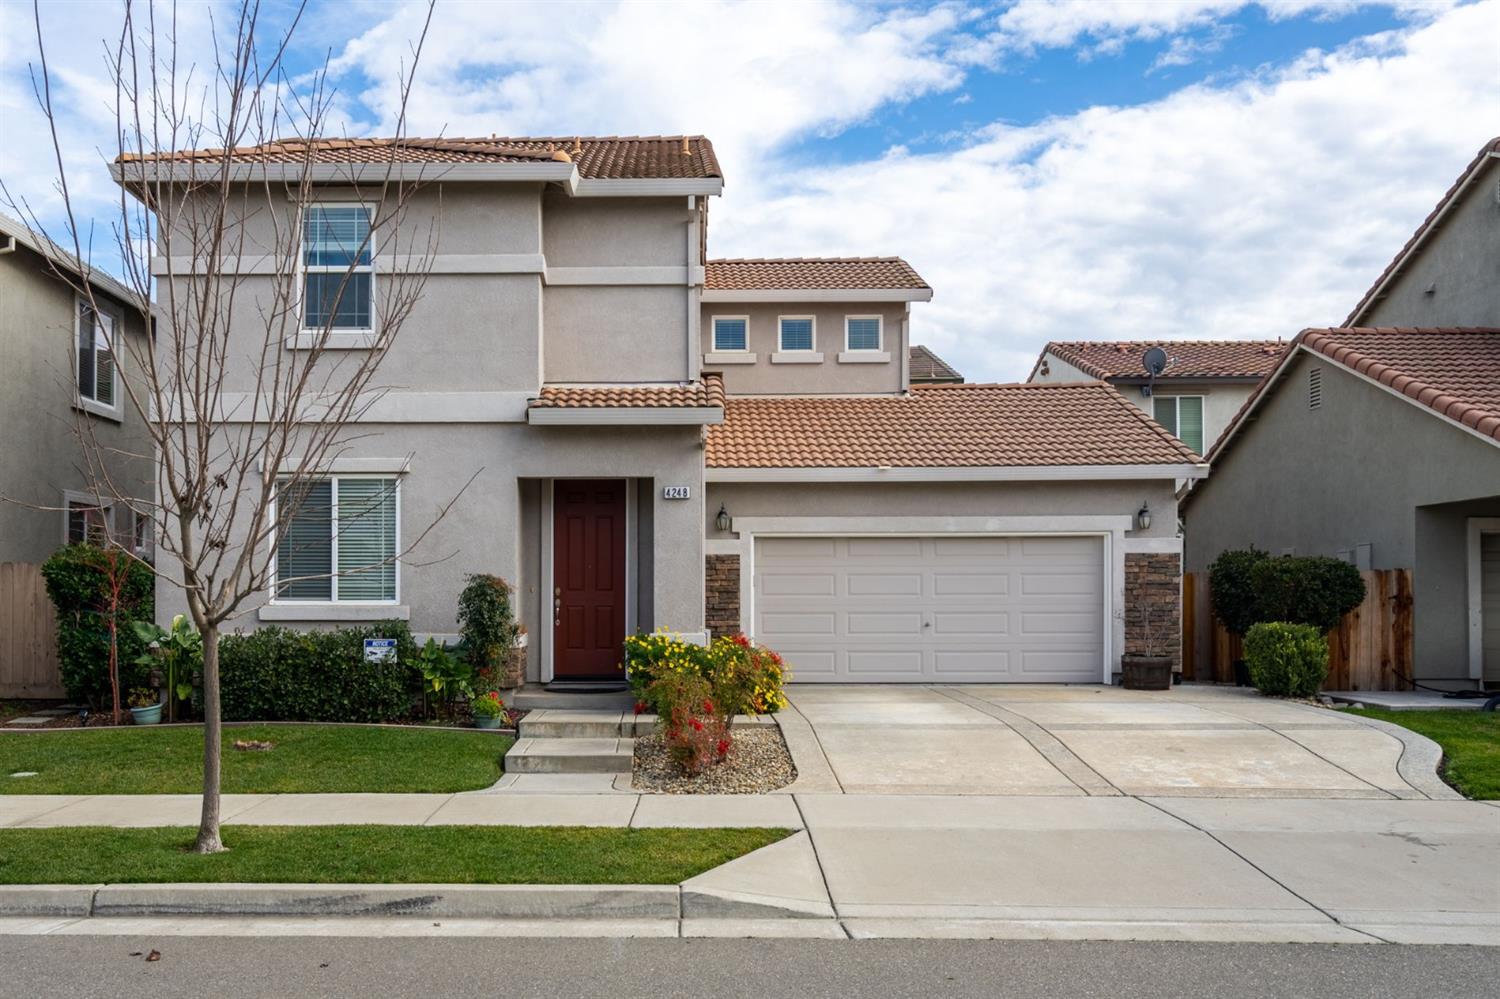 Welcome to the heart of West Natomas! Located in the highly sought after Westshore Community, this 3